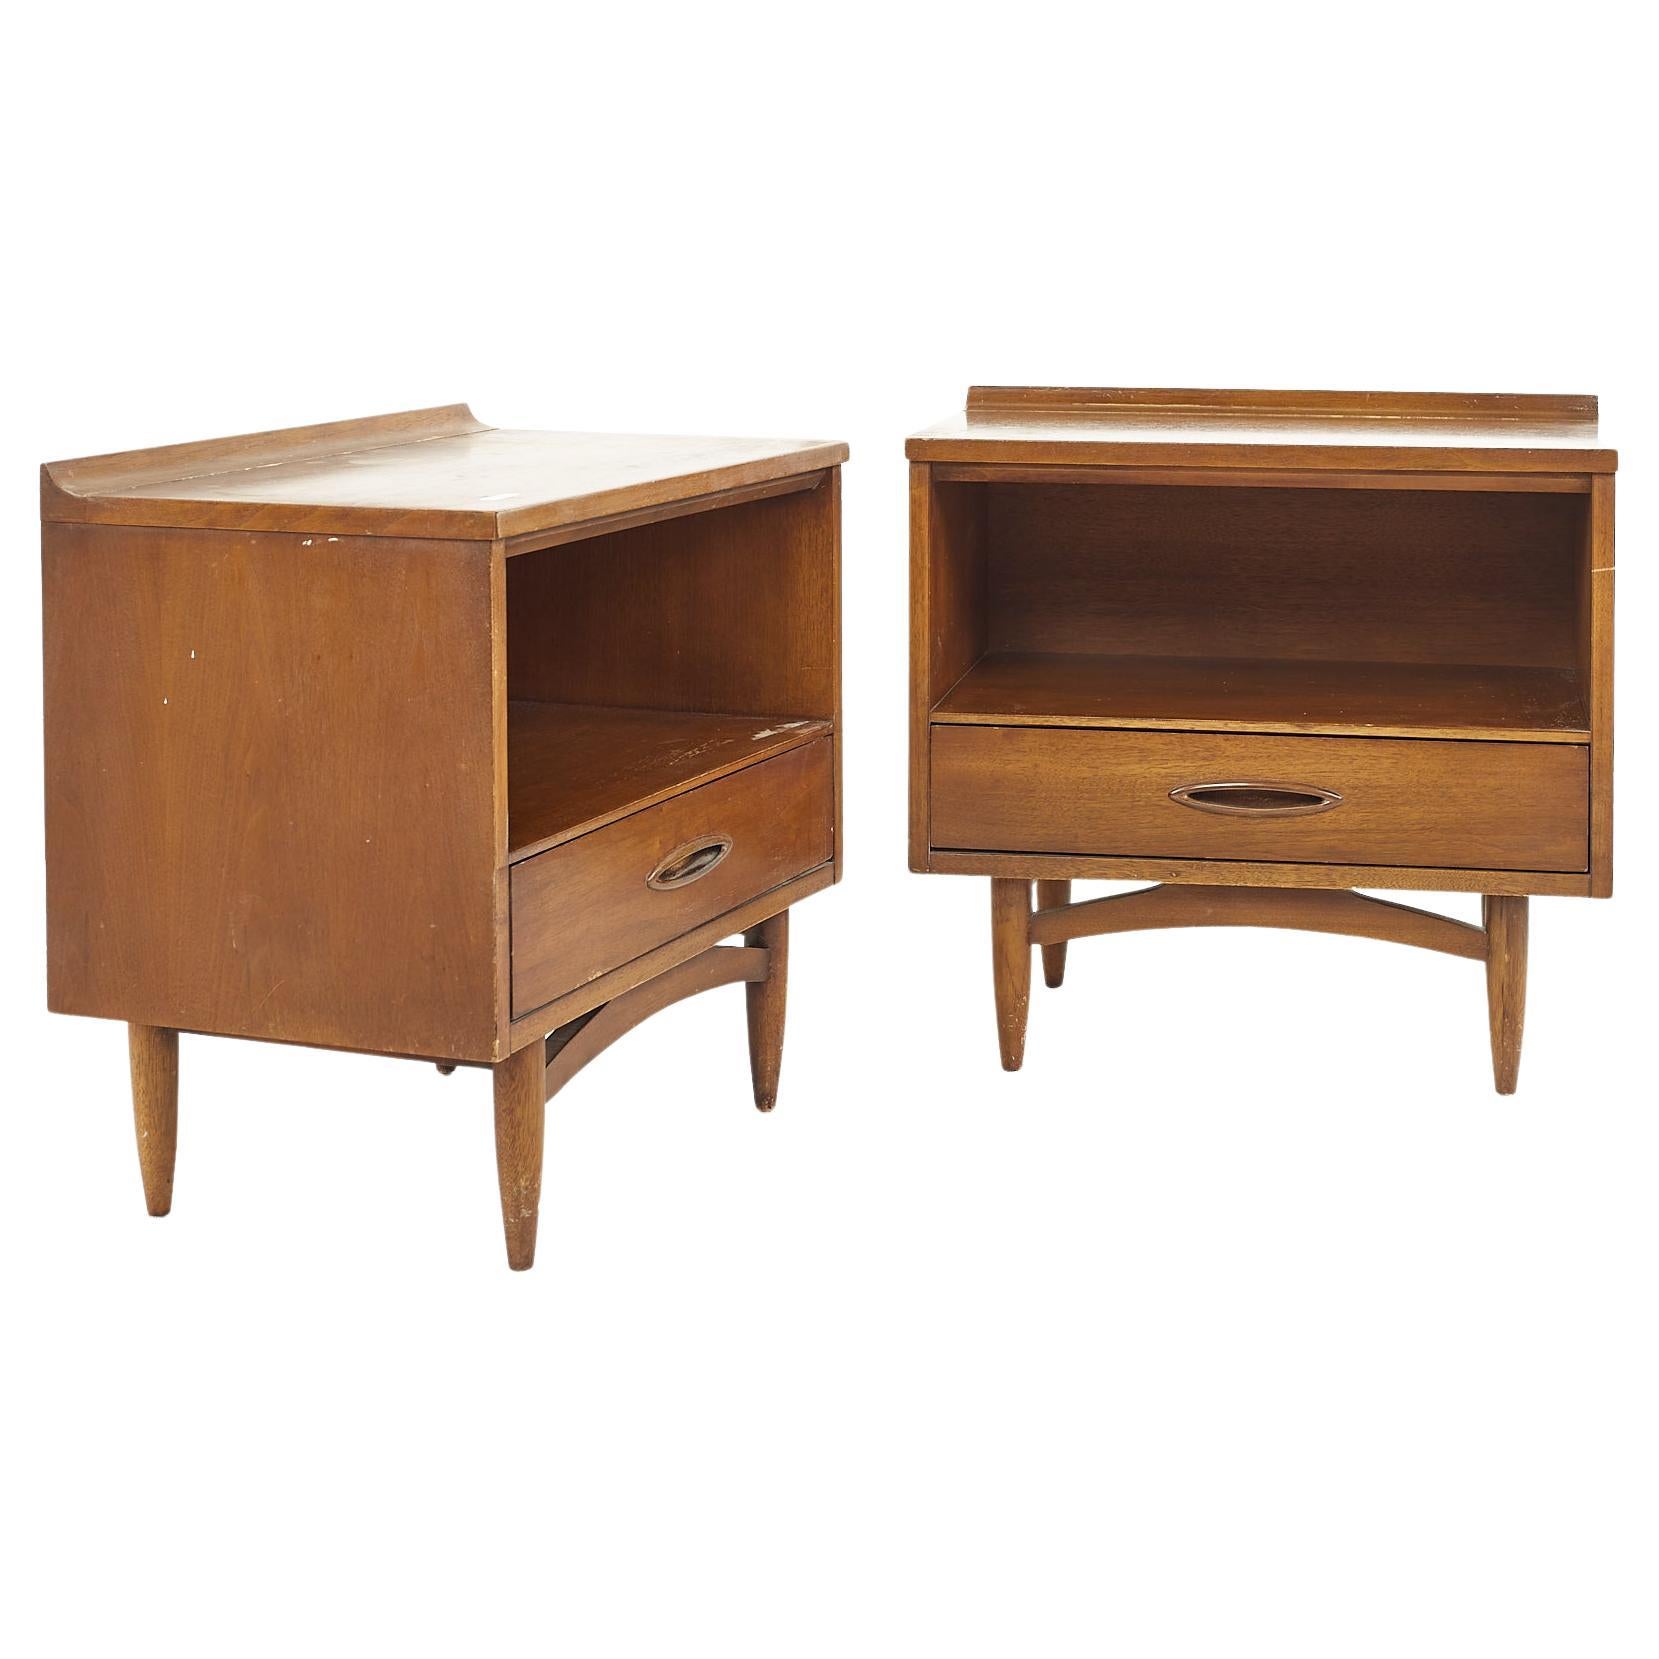 Broyhill Sculptra Brutalist mid century walnut single drawer nightstand - a pair

Each nightstand measures: 24 wide x 15 deep x 23 inches high 

All pieces of furniture can be had in what we call restored vintage condition. That means the piece